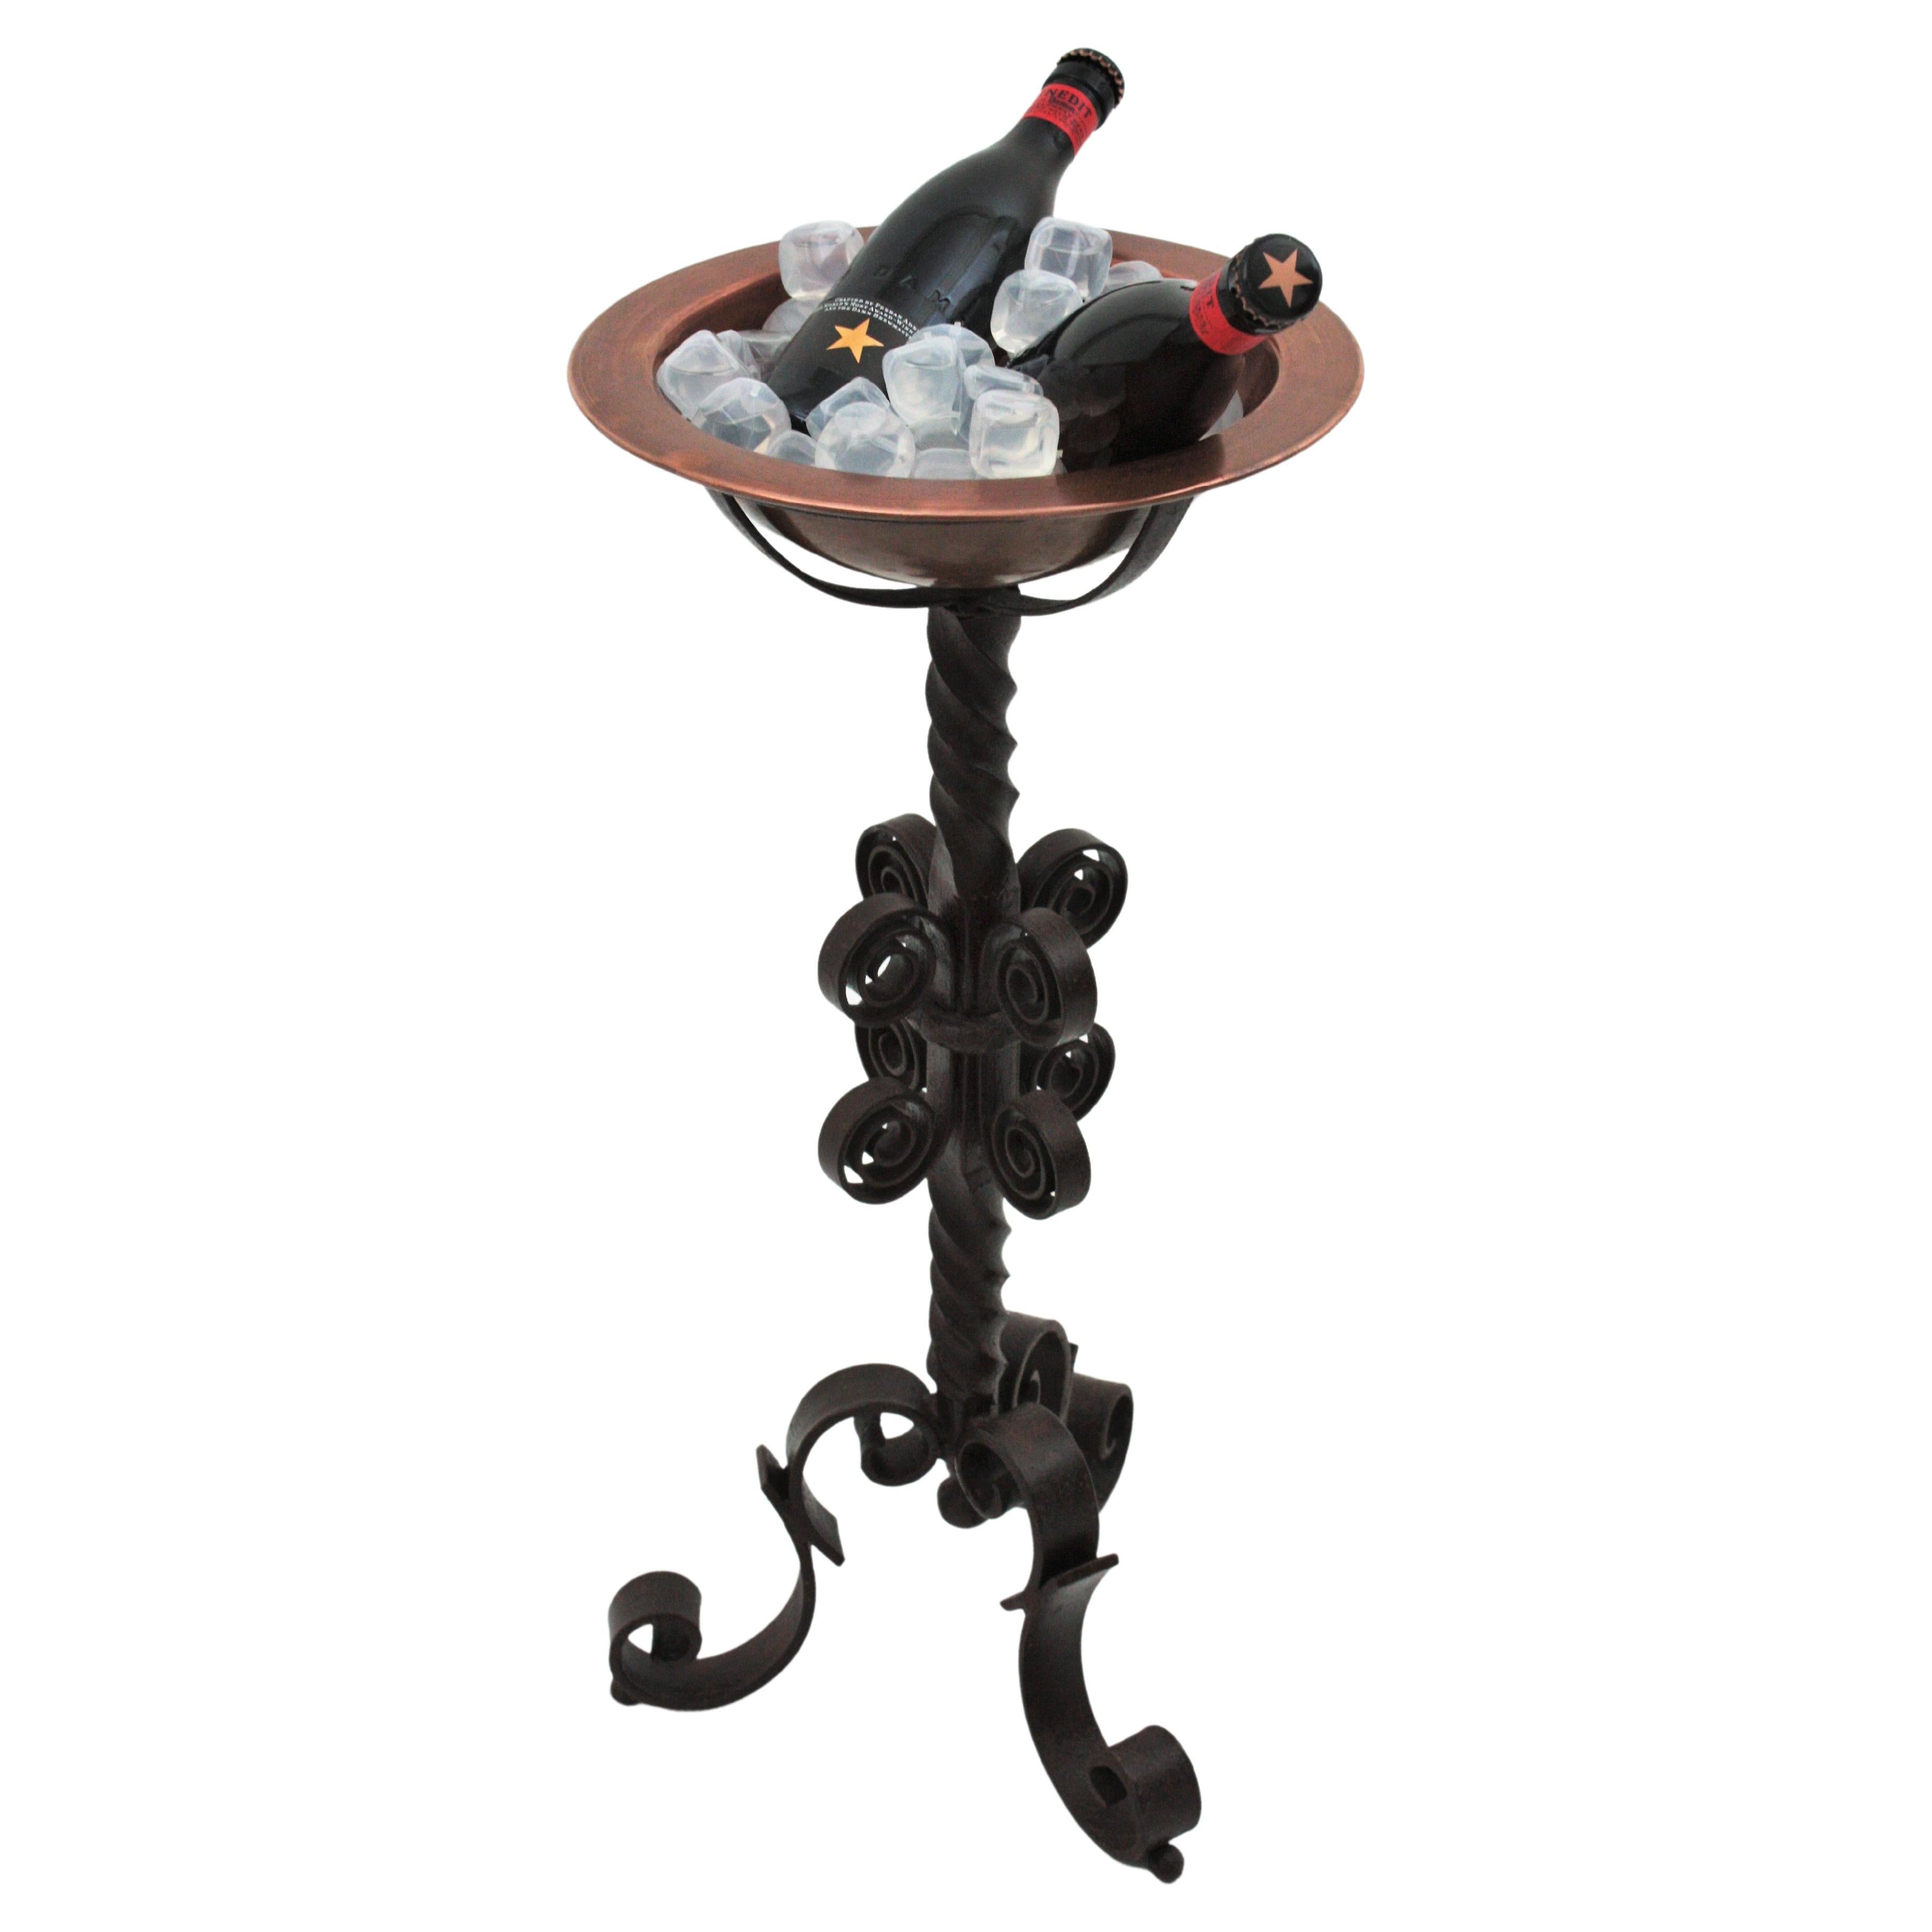 Spanish Champagne Wine Cooler on Stand, Copper and Wrought Iron